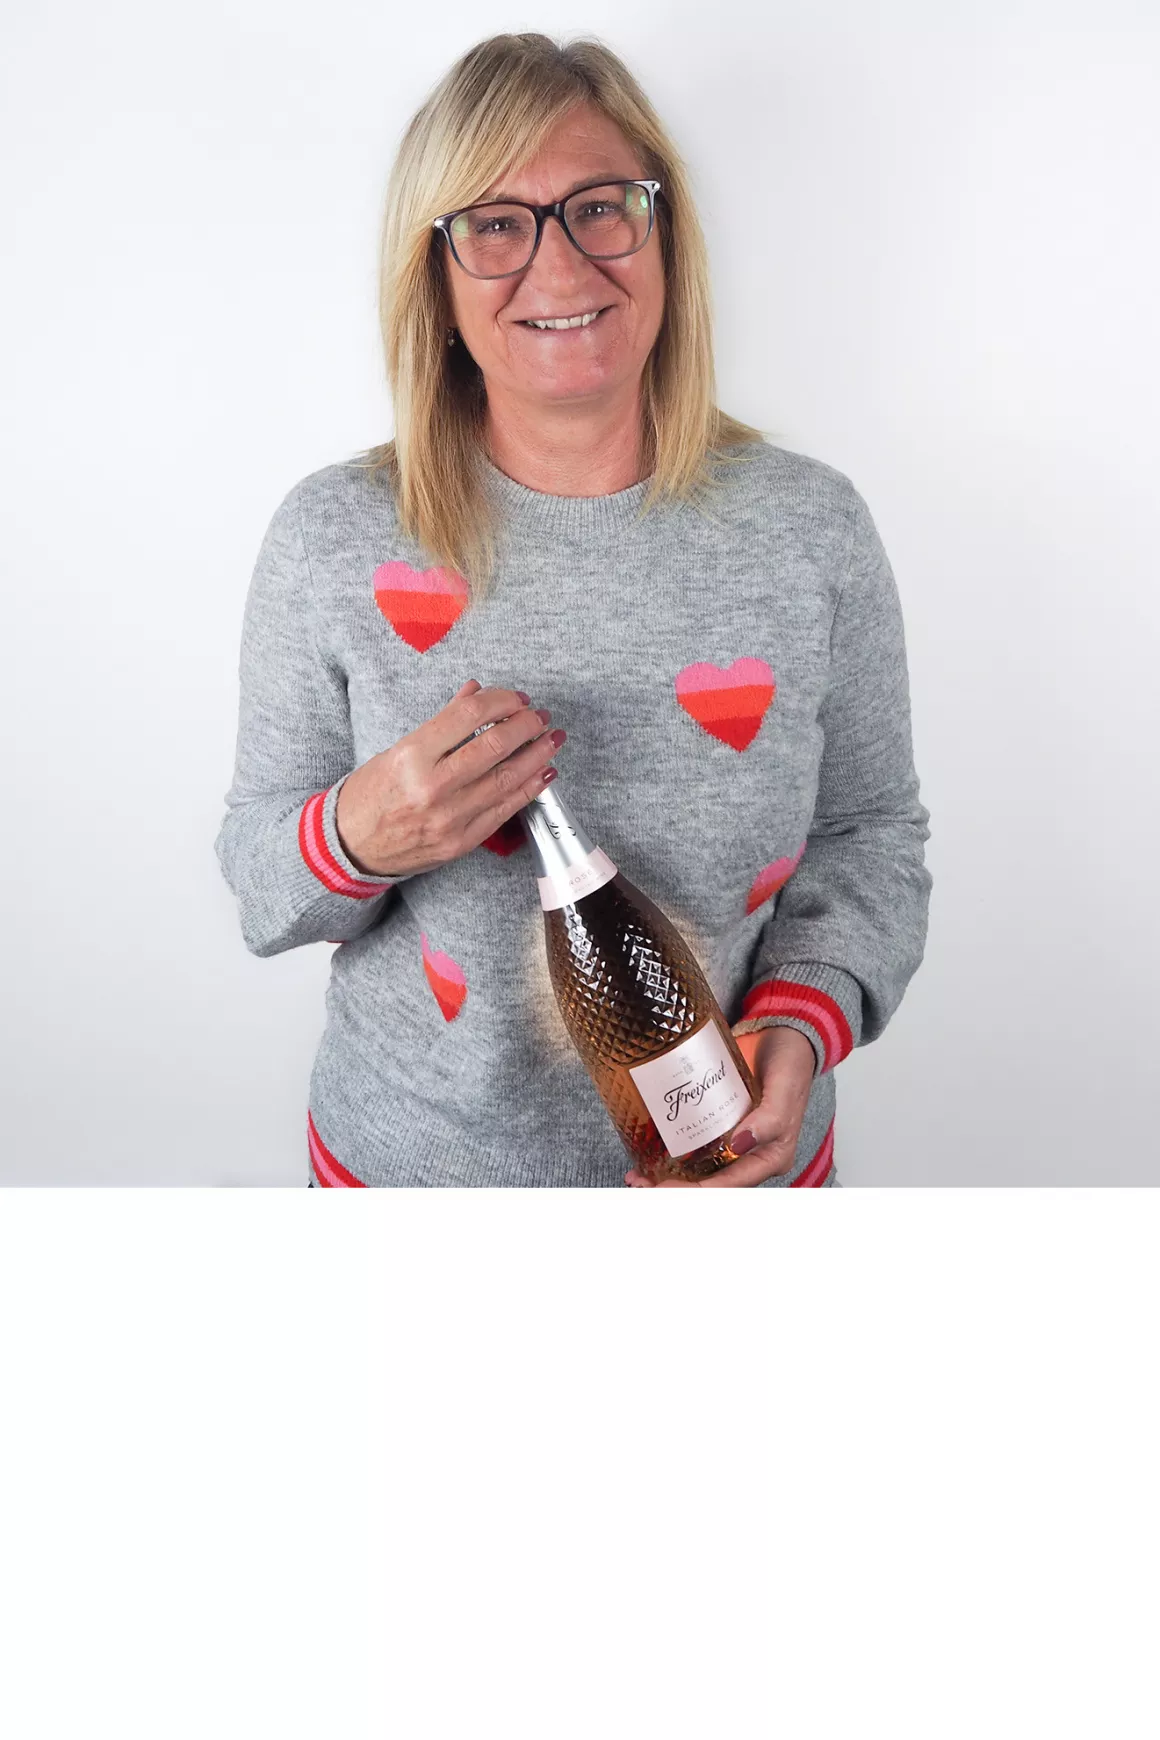 Karen Yaxley (accounts) with grey jumper with love hearts, holding bottle of Rose Prosecco